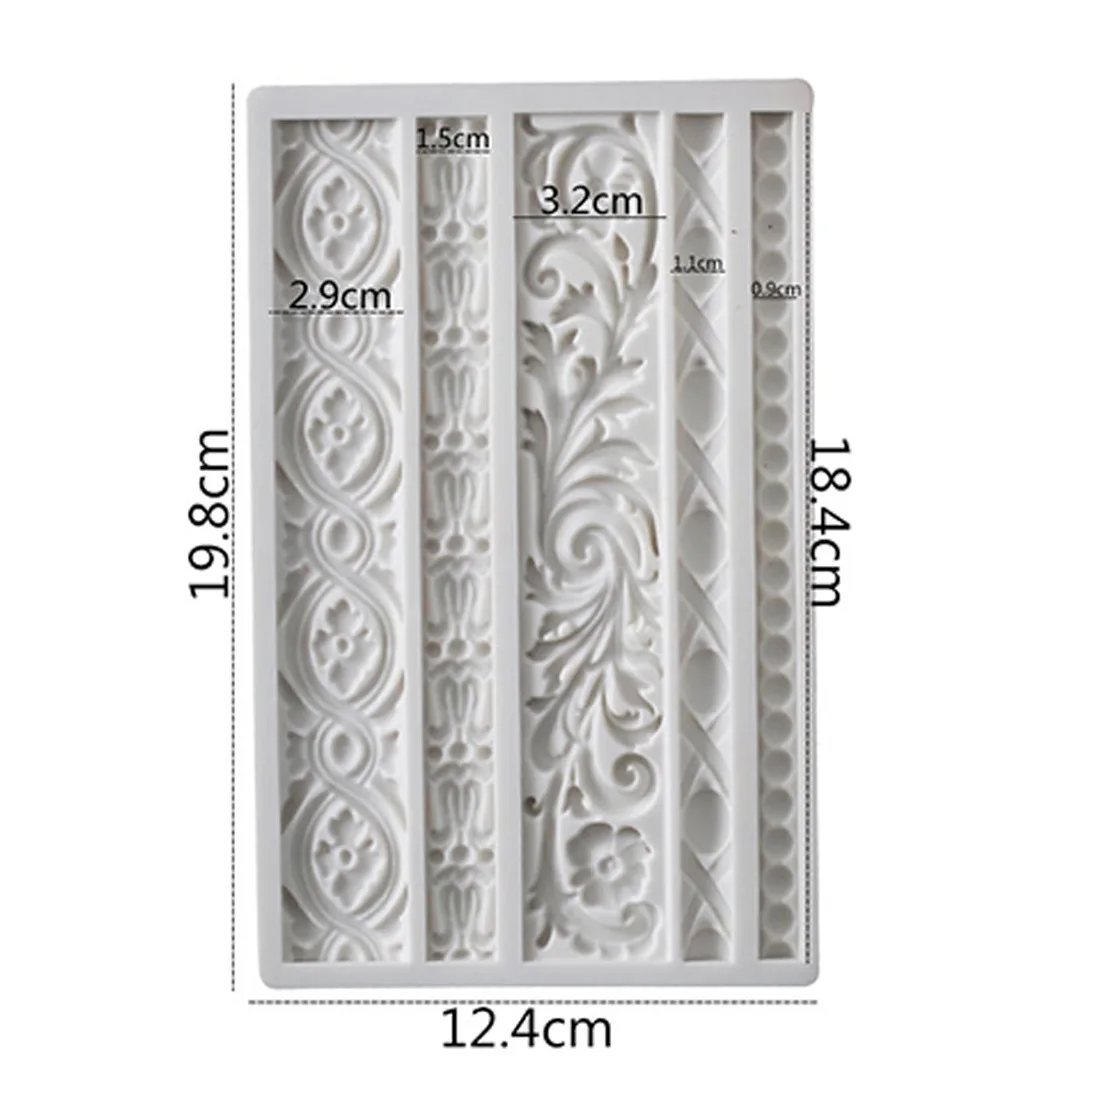 DIY Baroque Scroll Relief Cake Border Silicone Mold Frame Fondant Cake Decorating Tools Candy Chocolate Gumpaste Mould k054